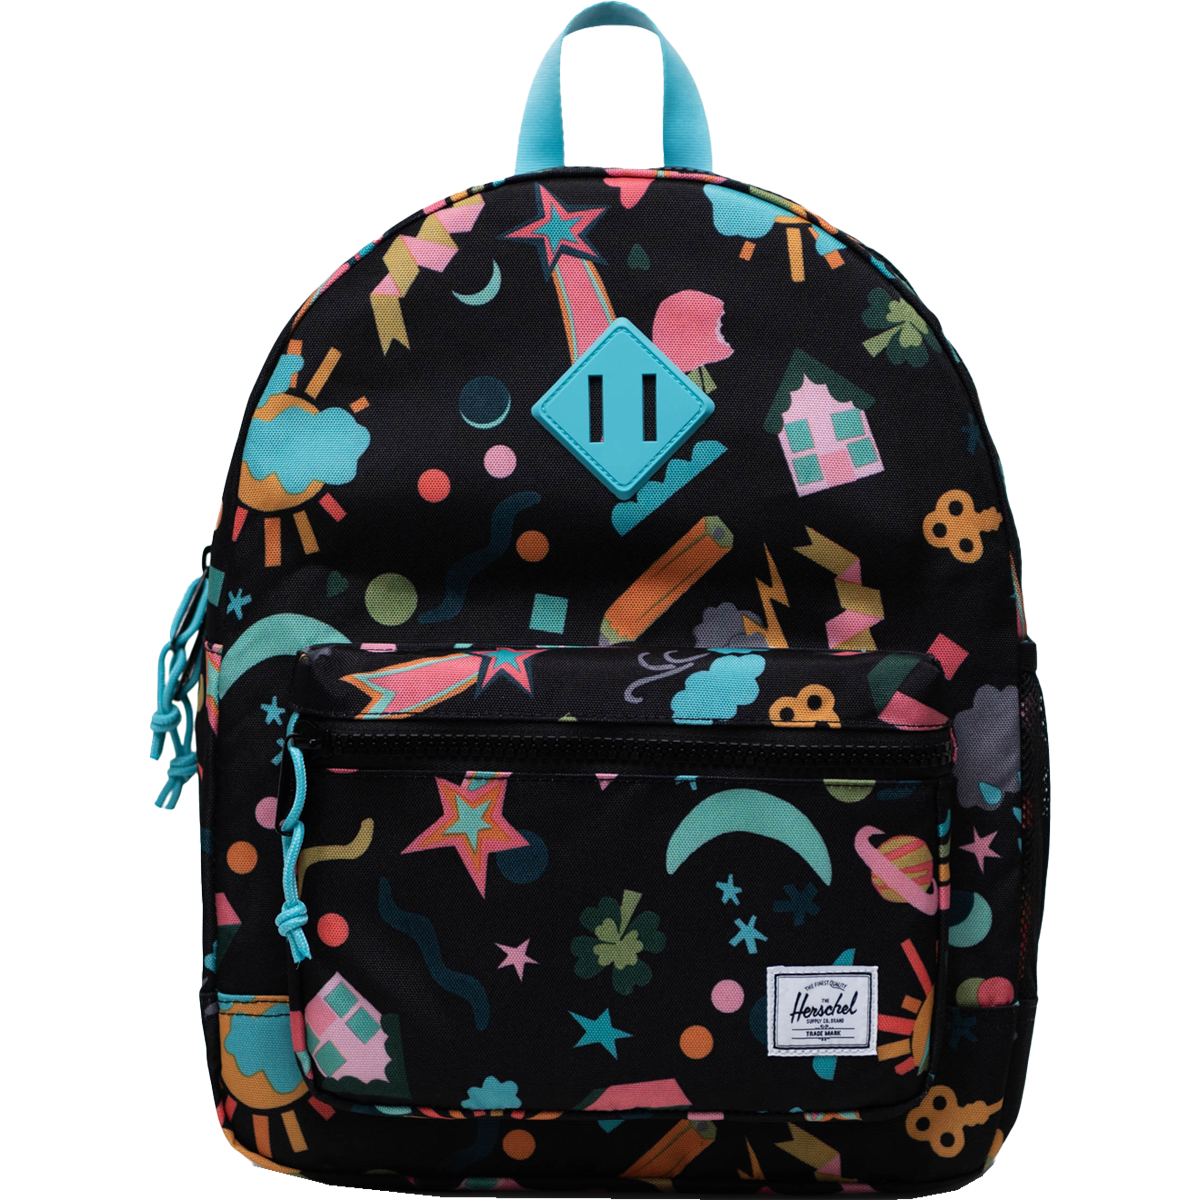 Heritage Backpack Youth 16L | Herschel Supply Co.